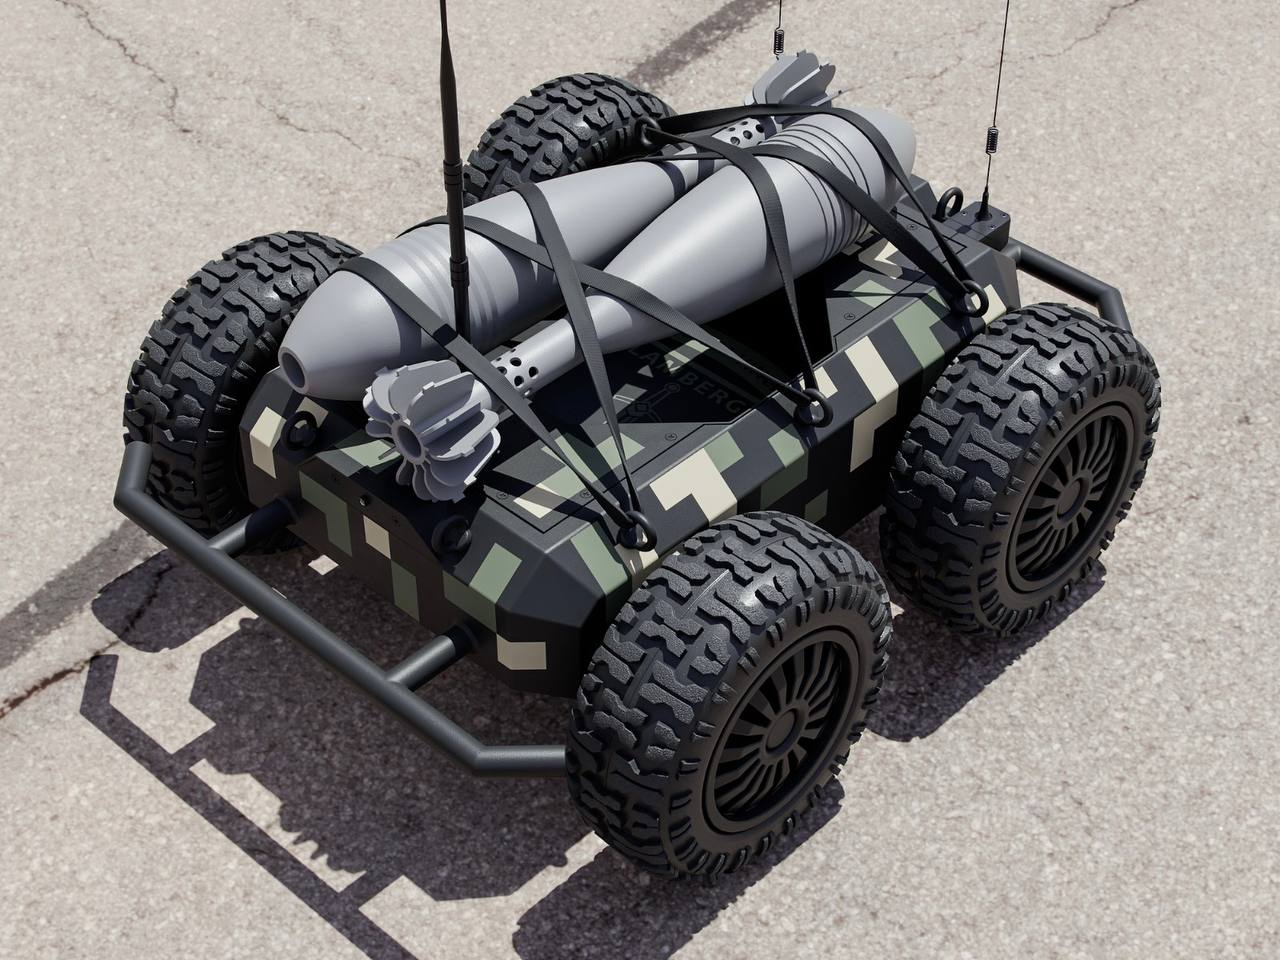 The Ratel S robot News Hub The Ratel Deminer System Joins Line of Ukrainian Military Robots